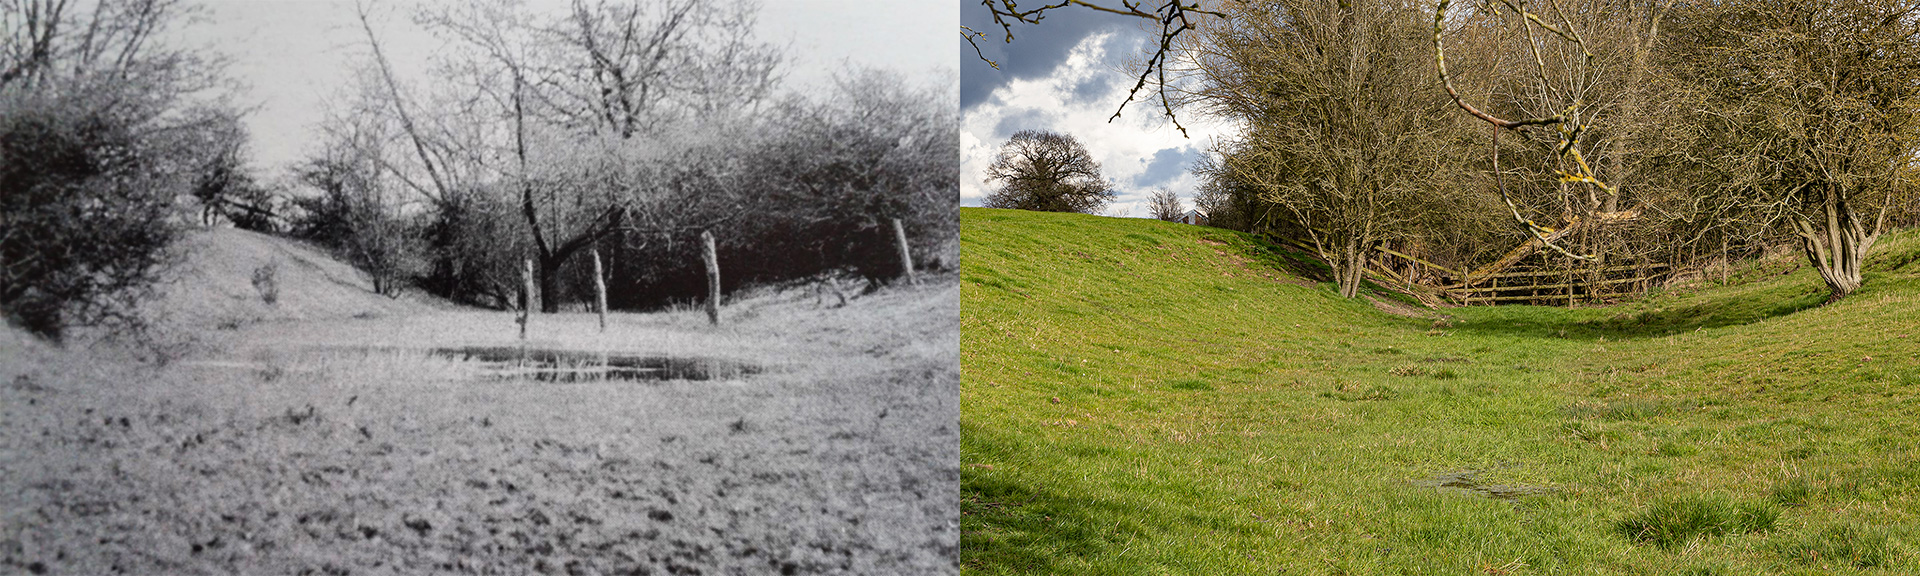 Wyfordby - Oakham Canal - Lock 7 - Then and now